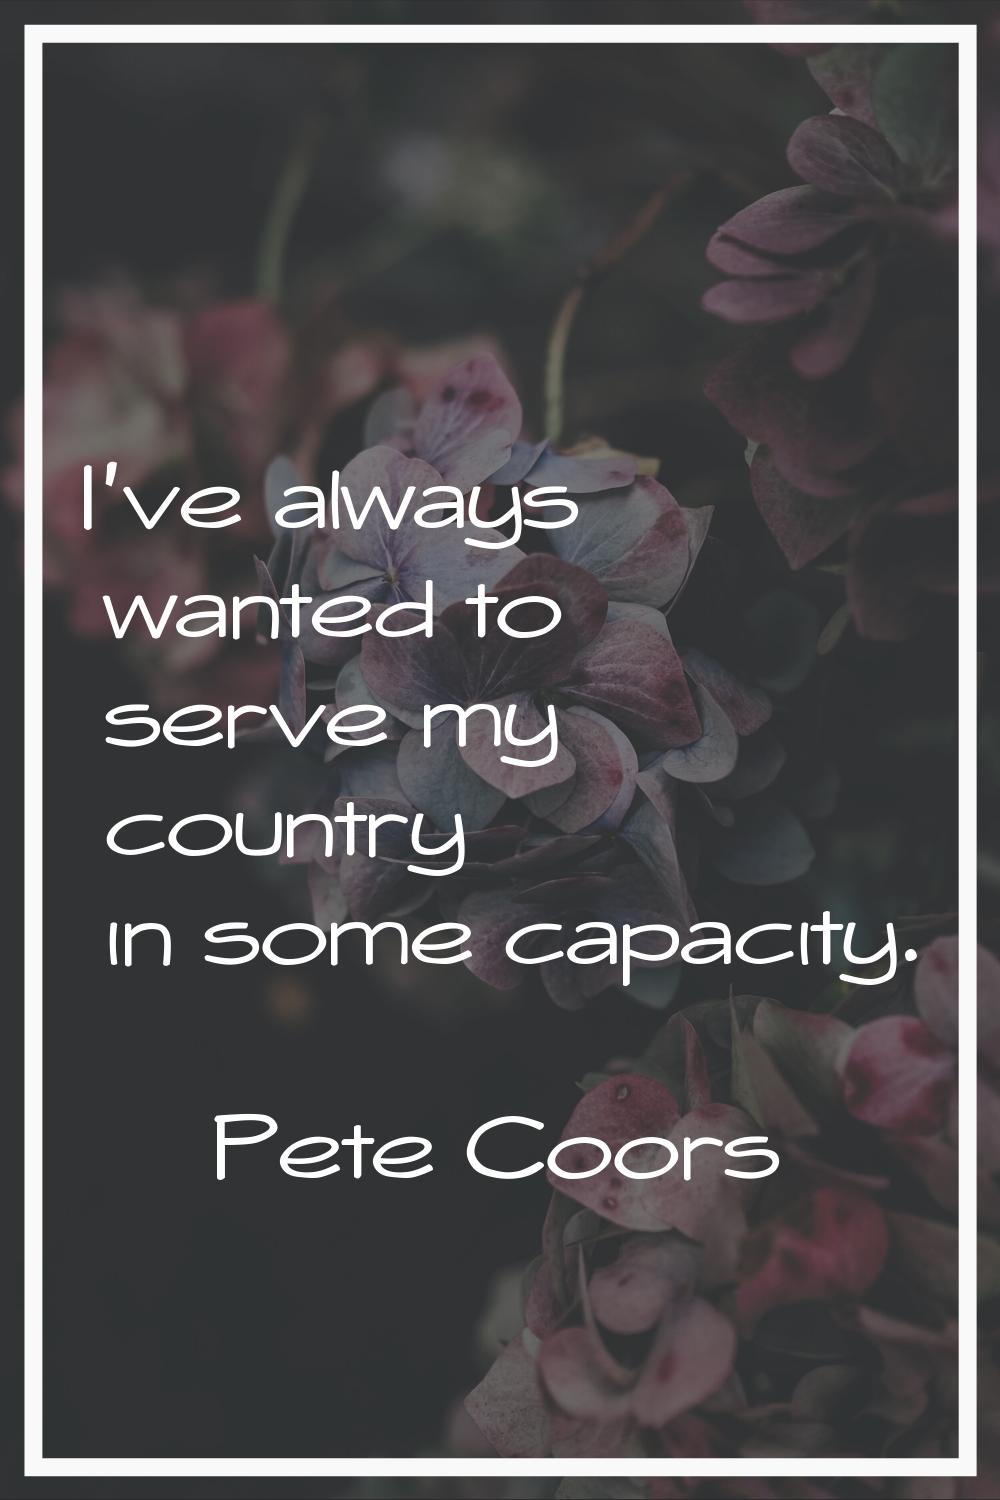 I've always wanted to serve my country in some capacity.